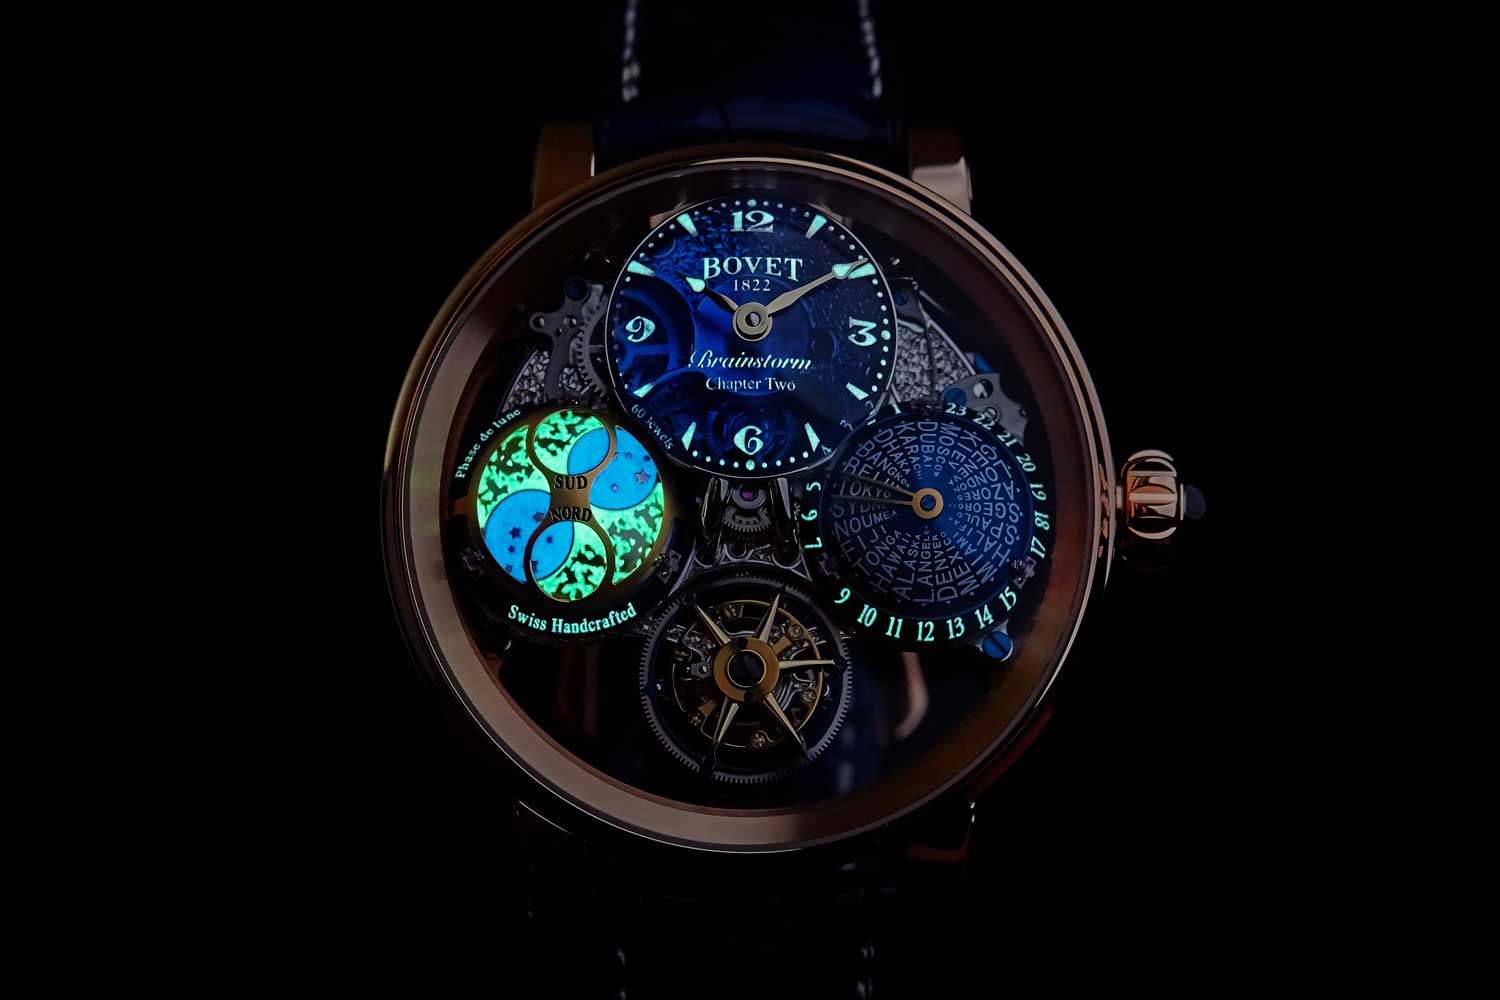 The watch features Bovet’s patented double-sided flying tourbillon, a second-time zone with a twenty-four city disc and a precision moon phase showing both hemispheres